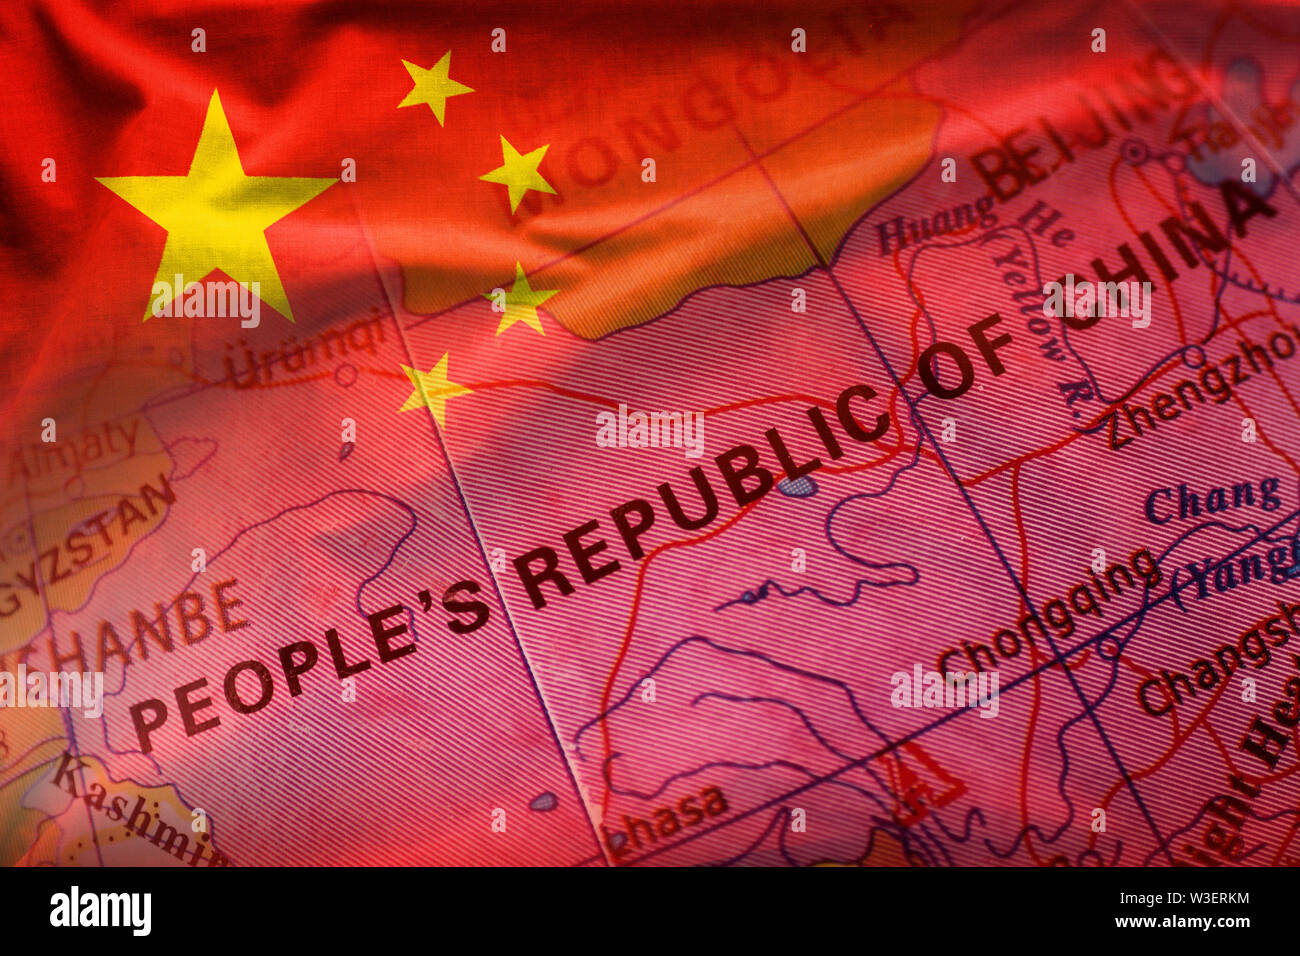 Peoples Republic of China on a world globe in close up focus with an overlay of the Chinese flag Stock Photo